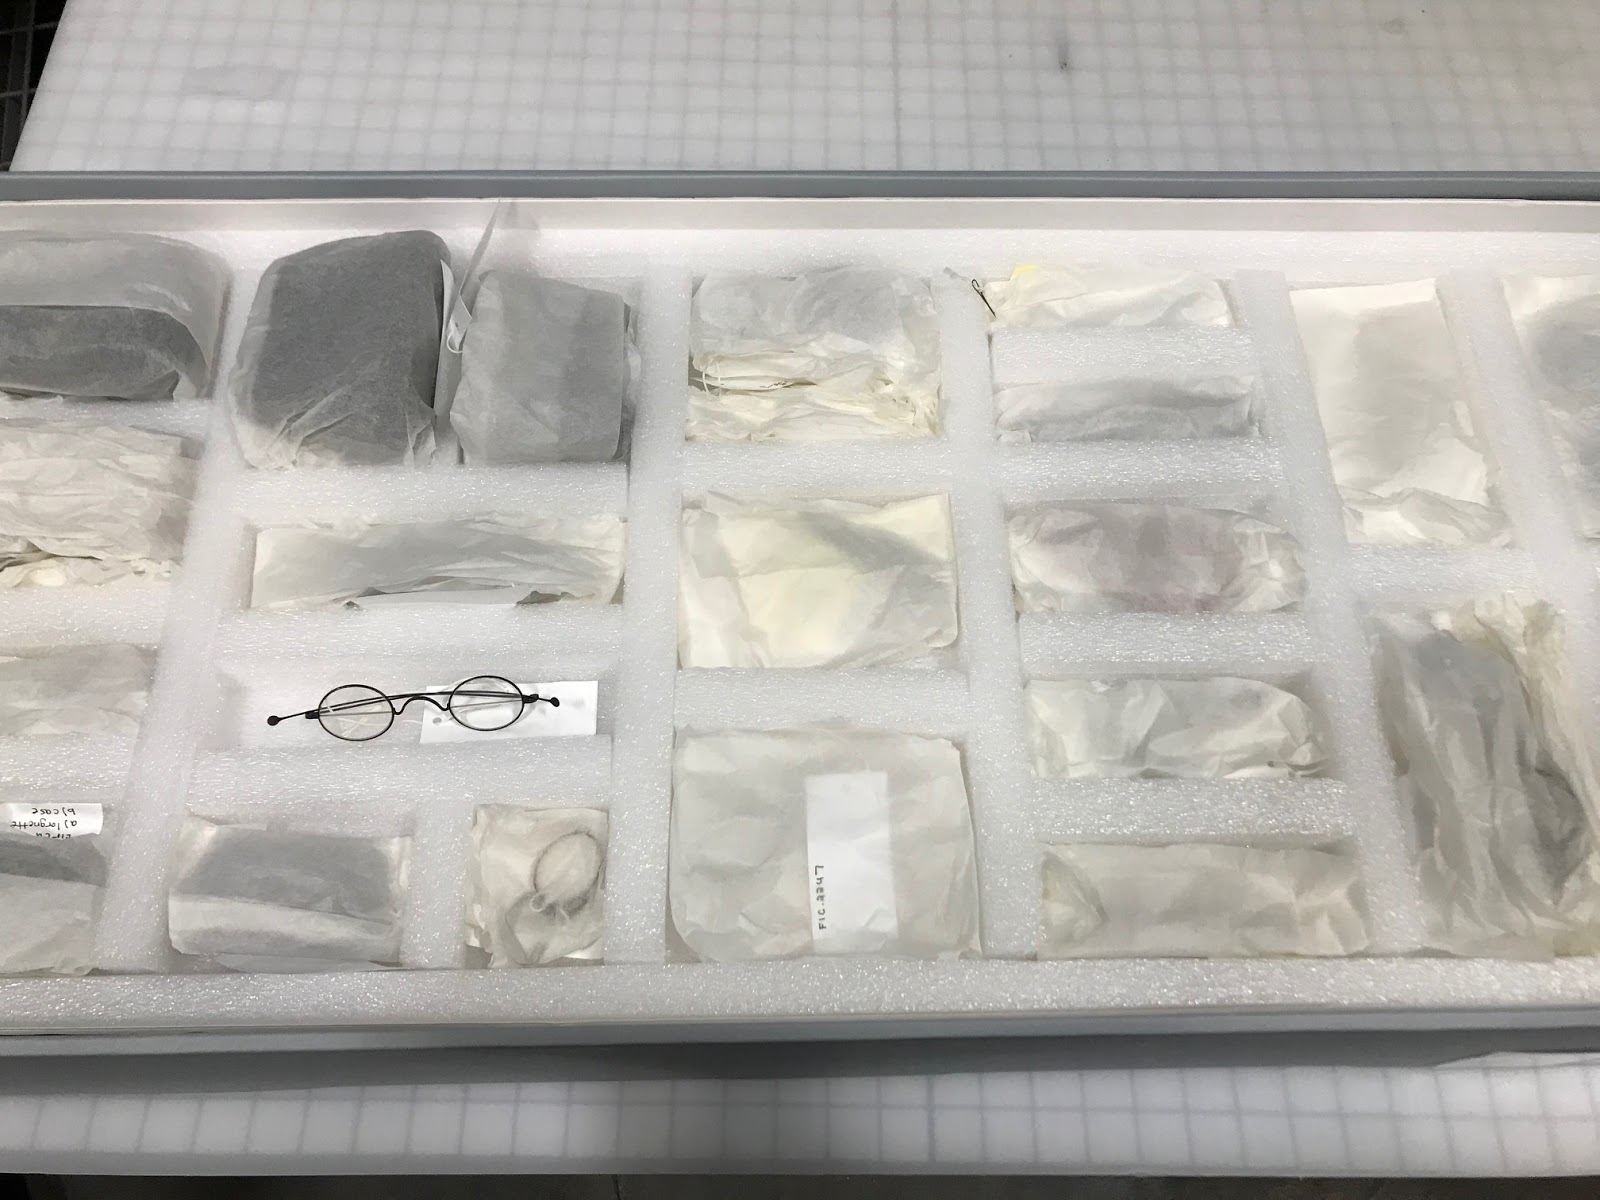 Cavity tray containing glass eyewear with metal frames.